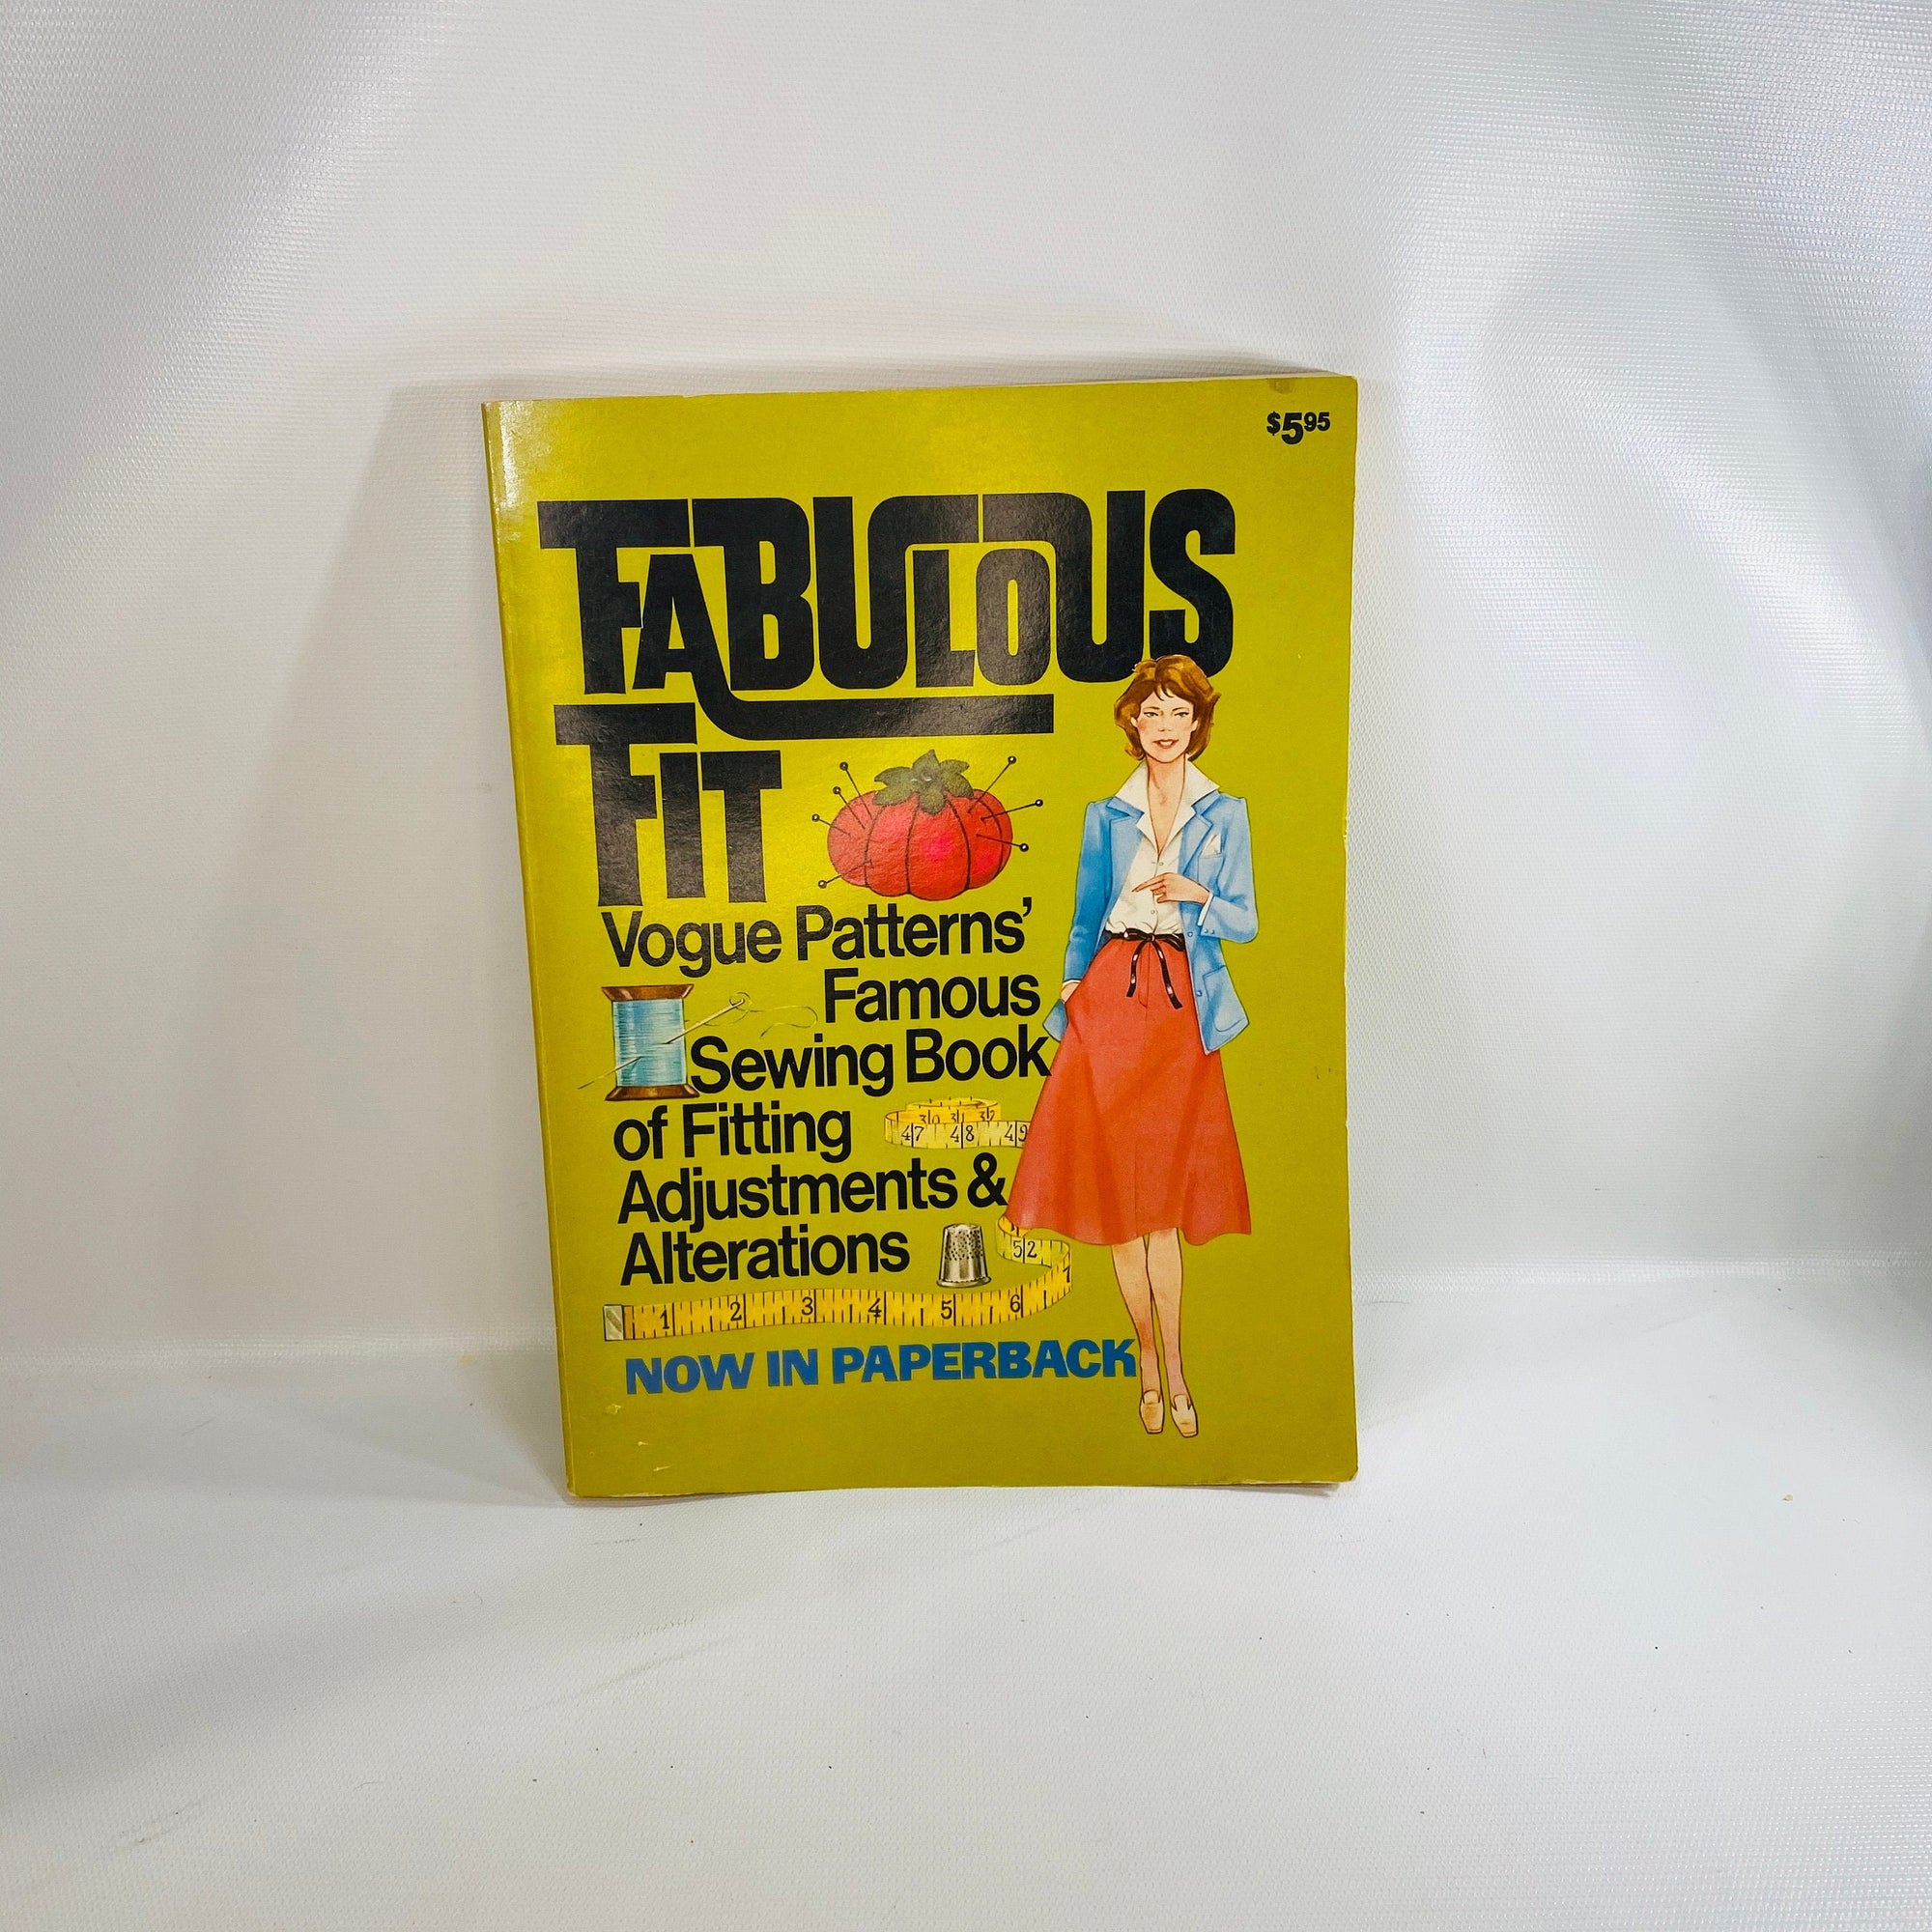 Fabulous Fit Vogue Patterns Famous Sewing Book by Patricia Perry 1977